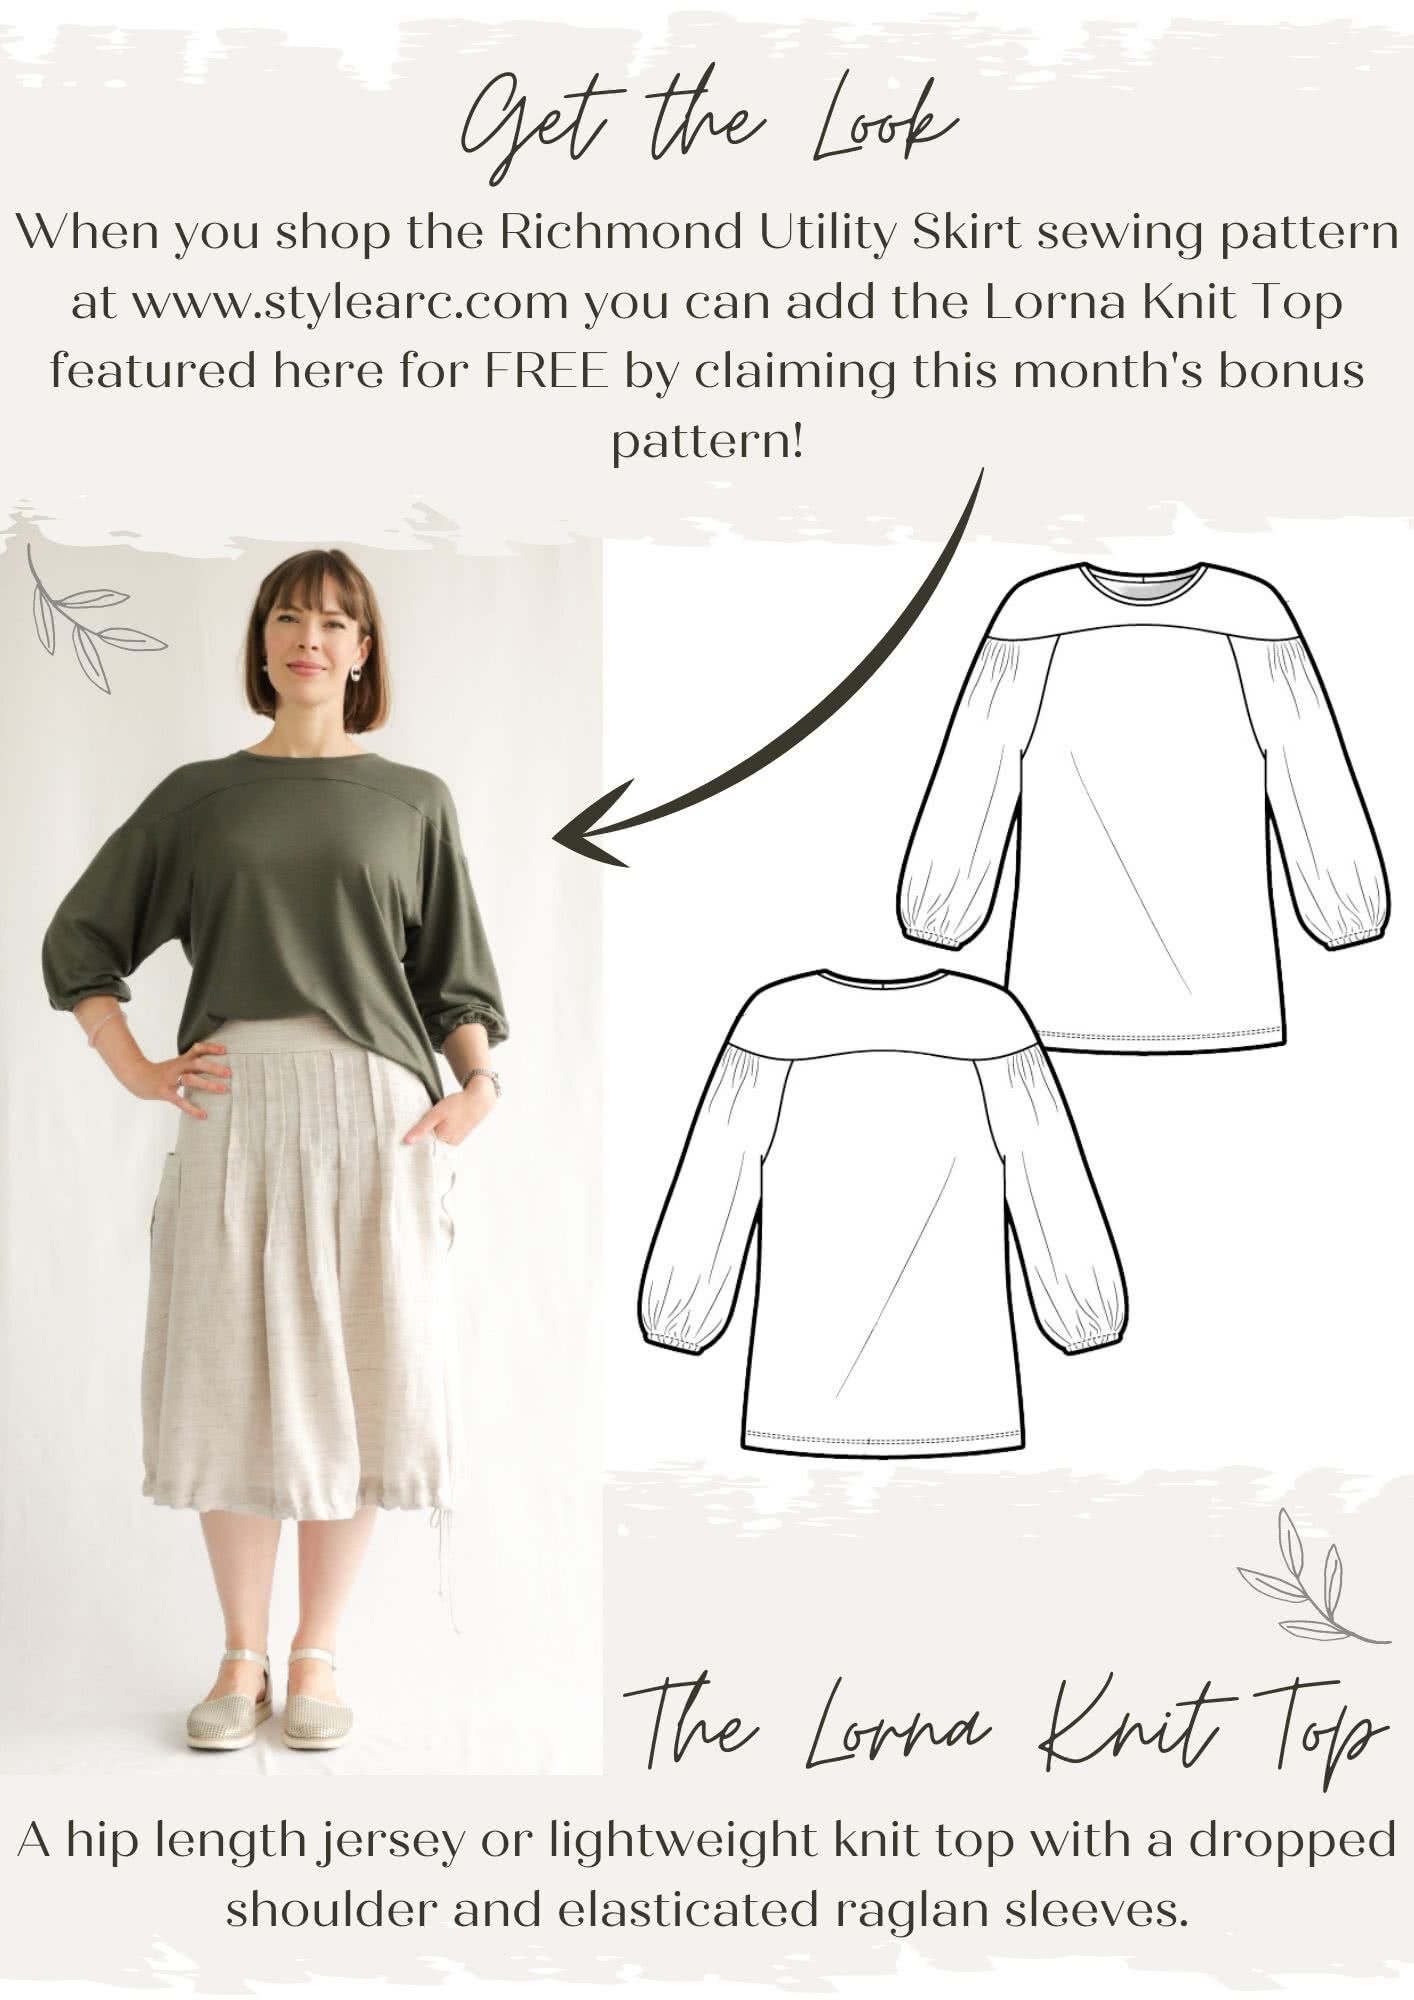 Get the Look with the December Bonus Pattern - Lorna Knit Top